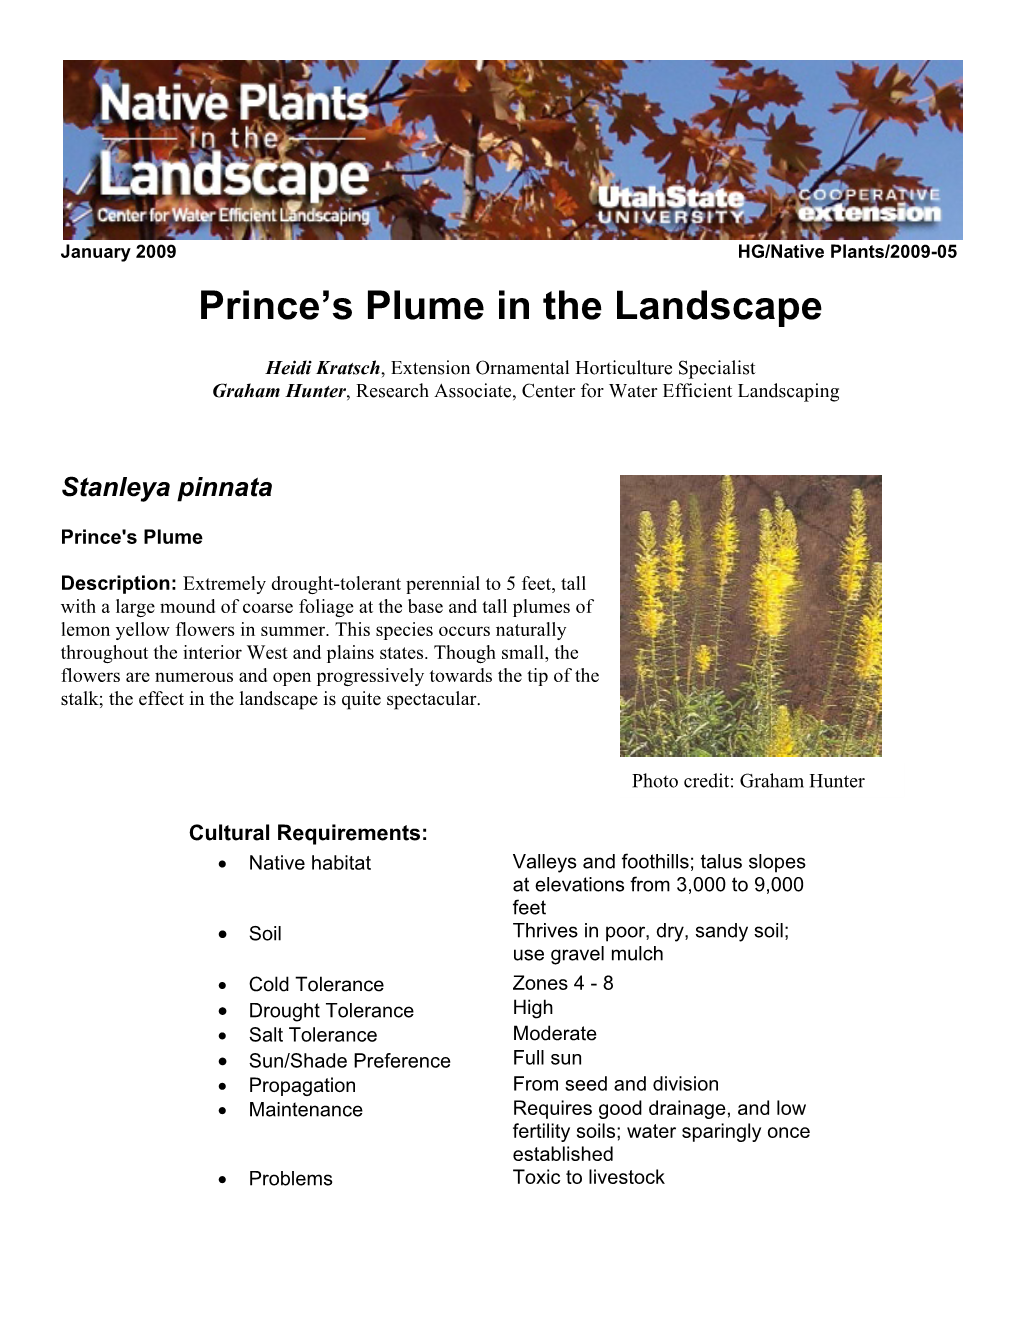 Prince's Plume in the Landscape